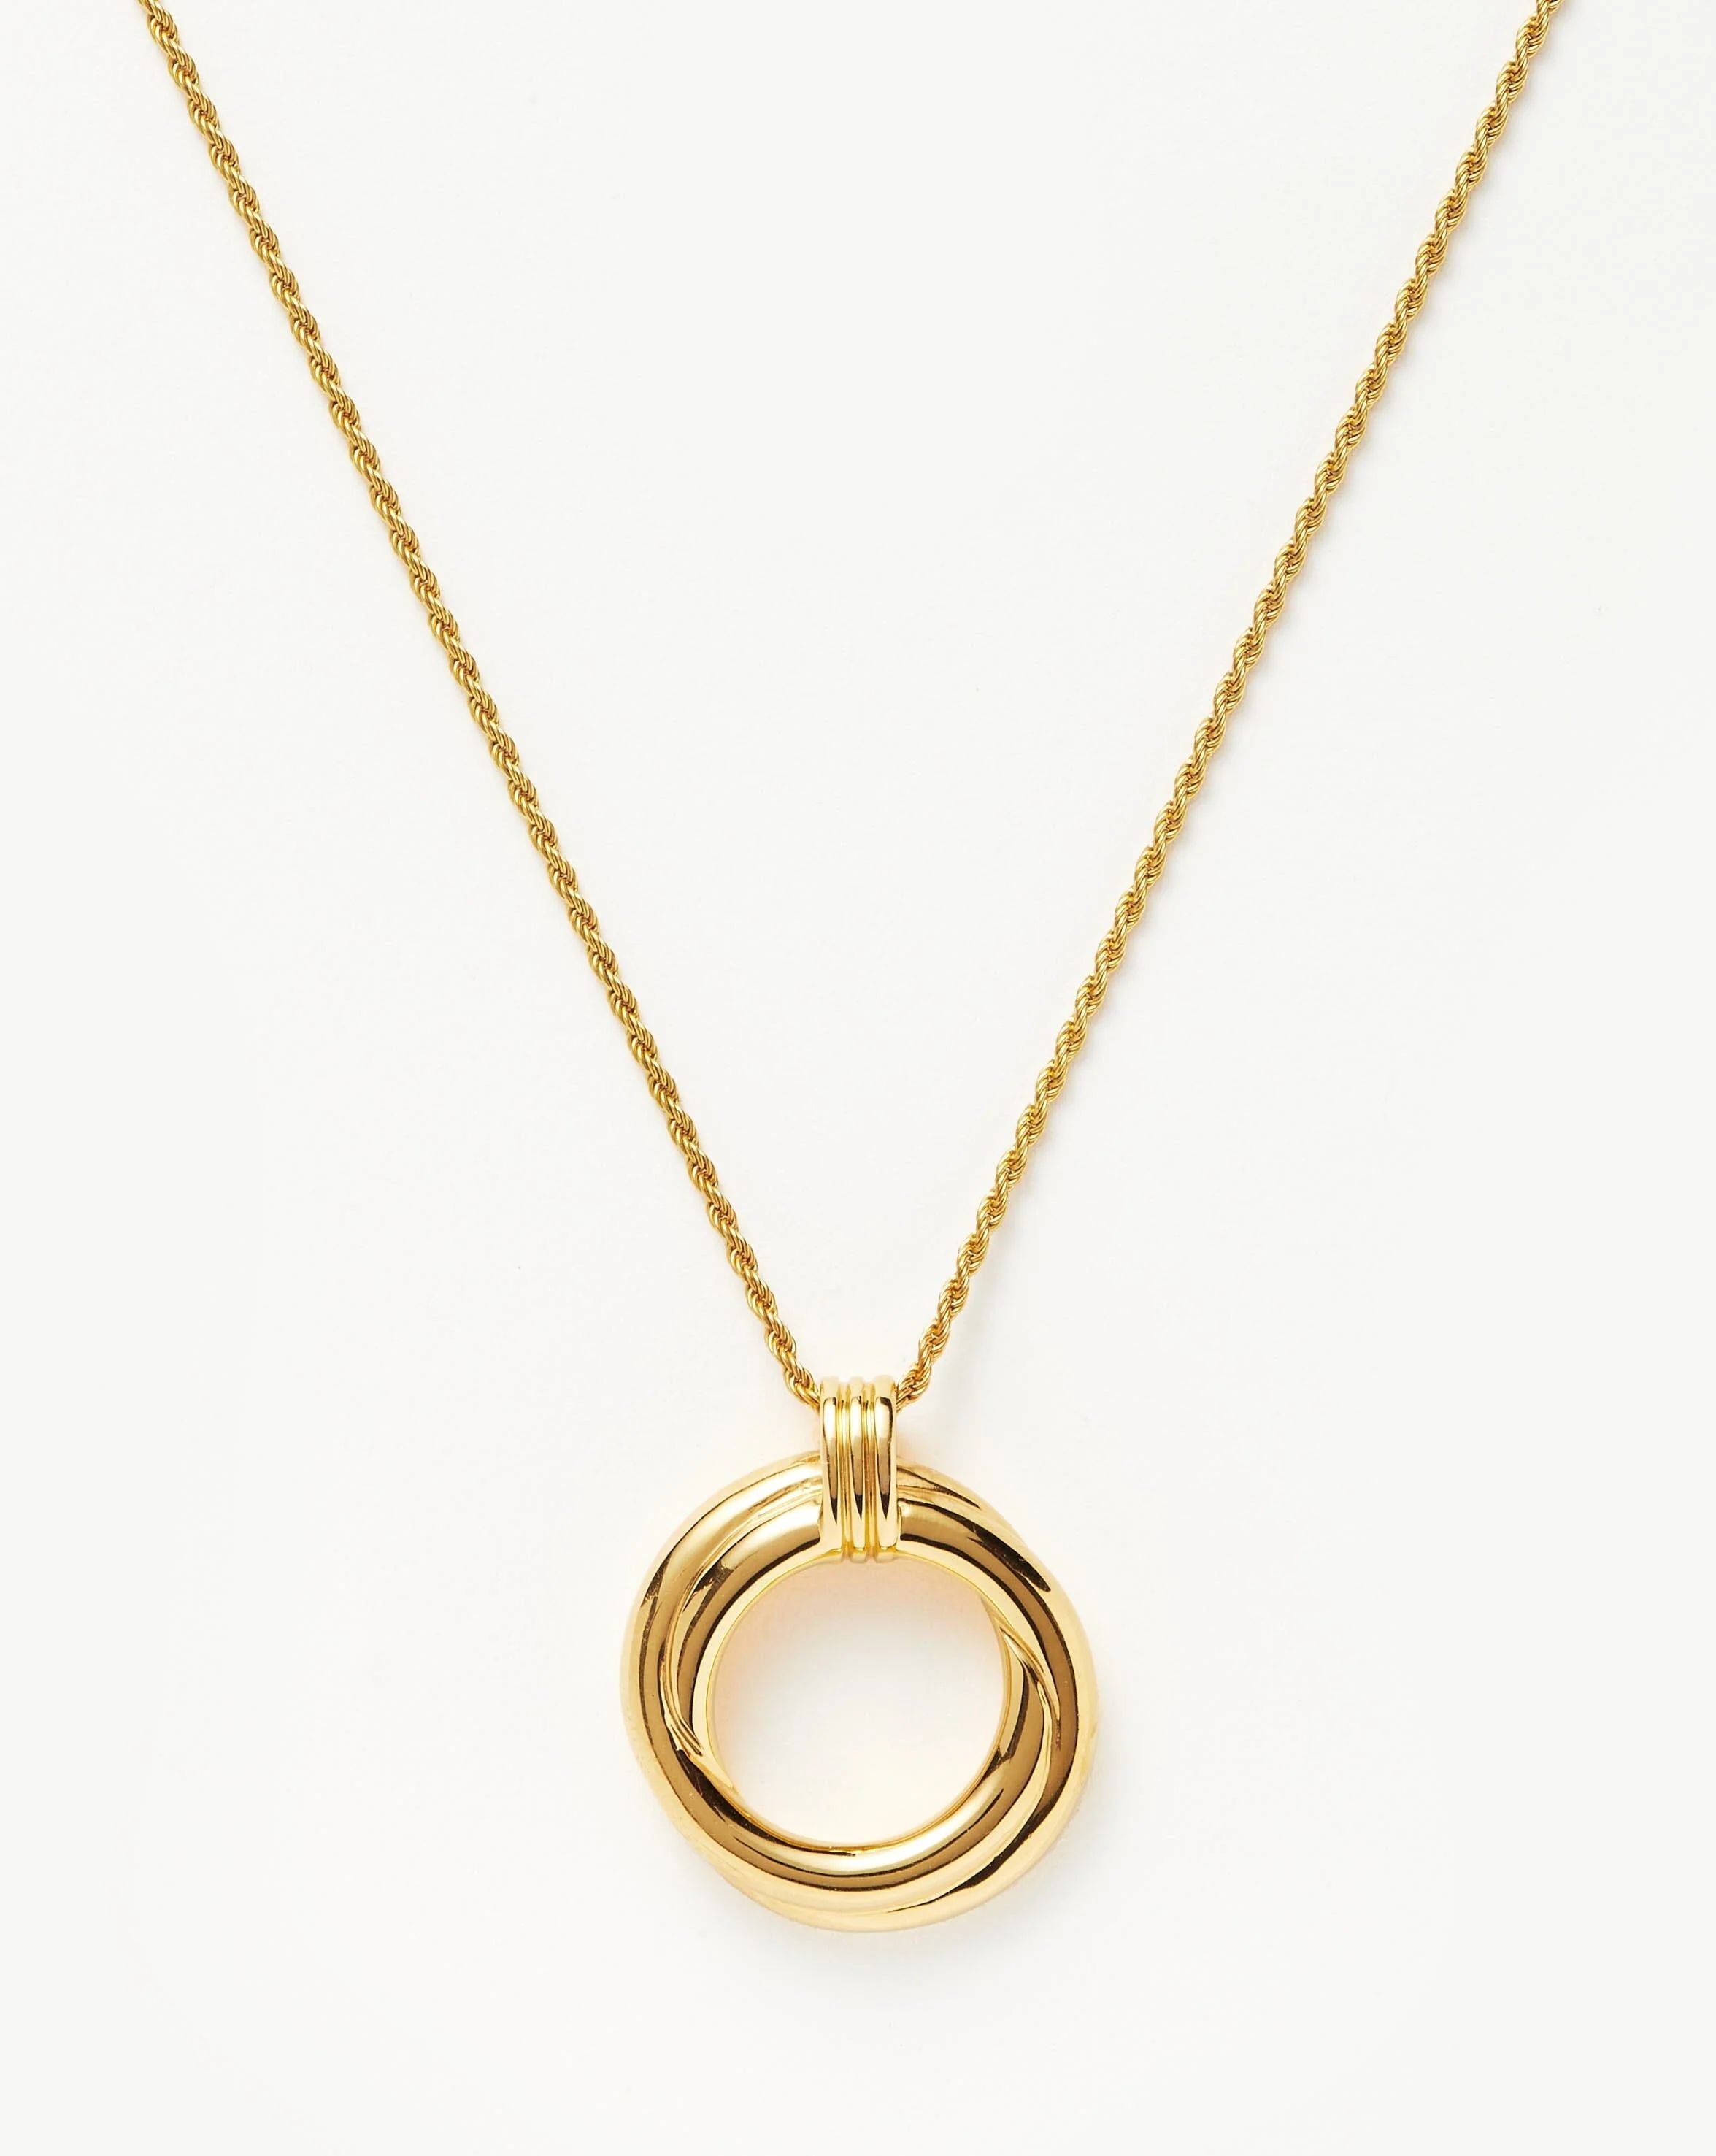 Lucy Williams Entwine Necklace | Missoma